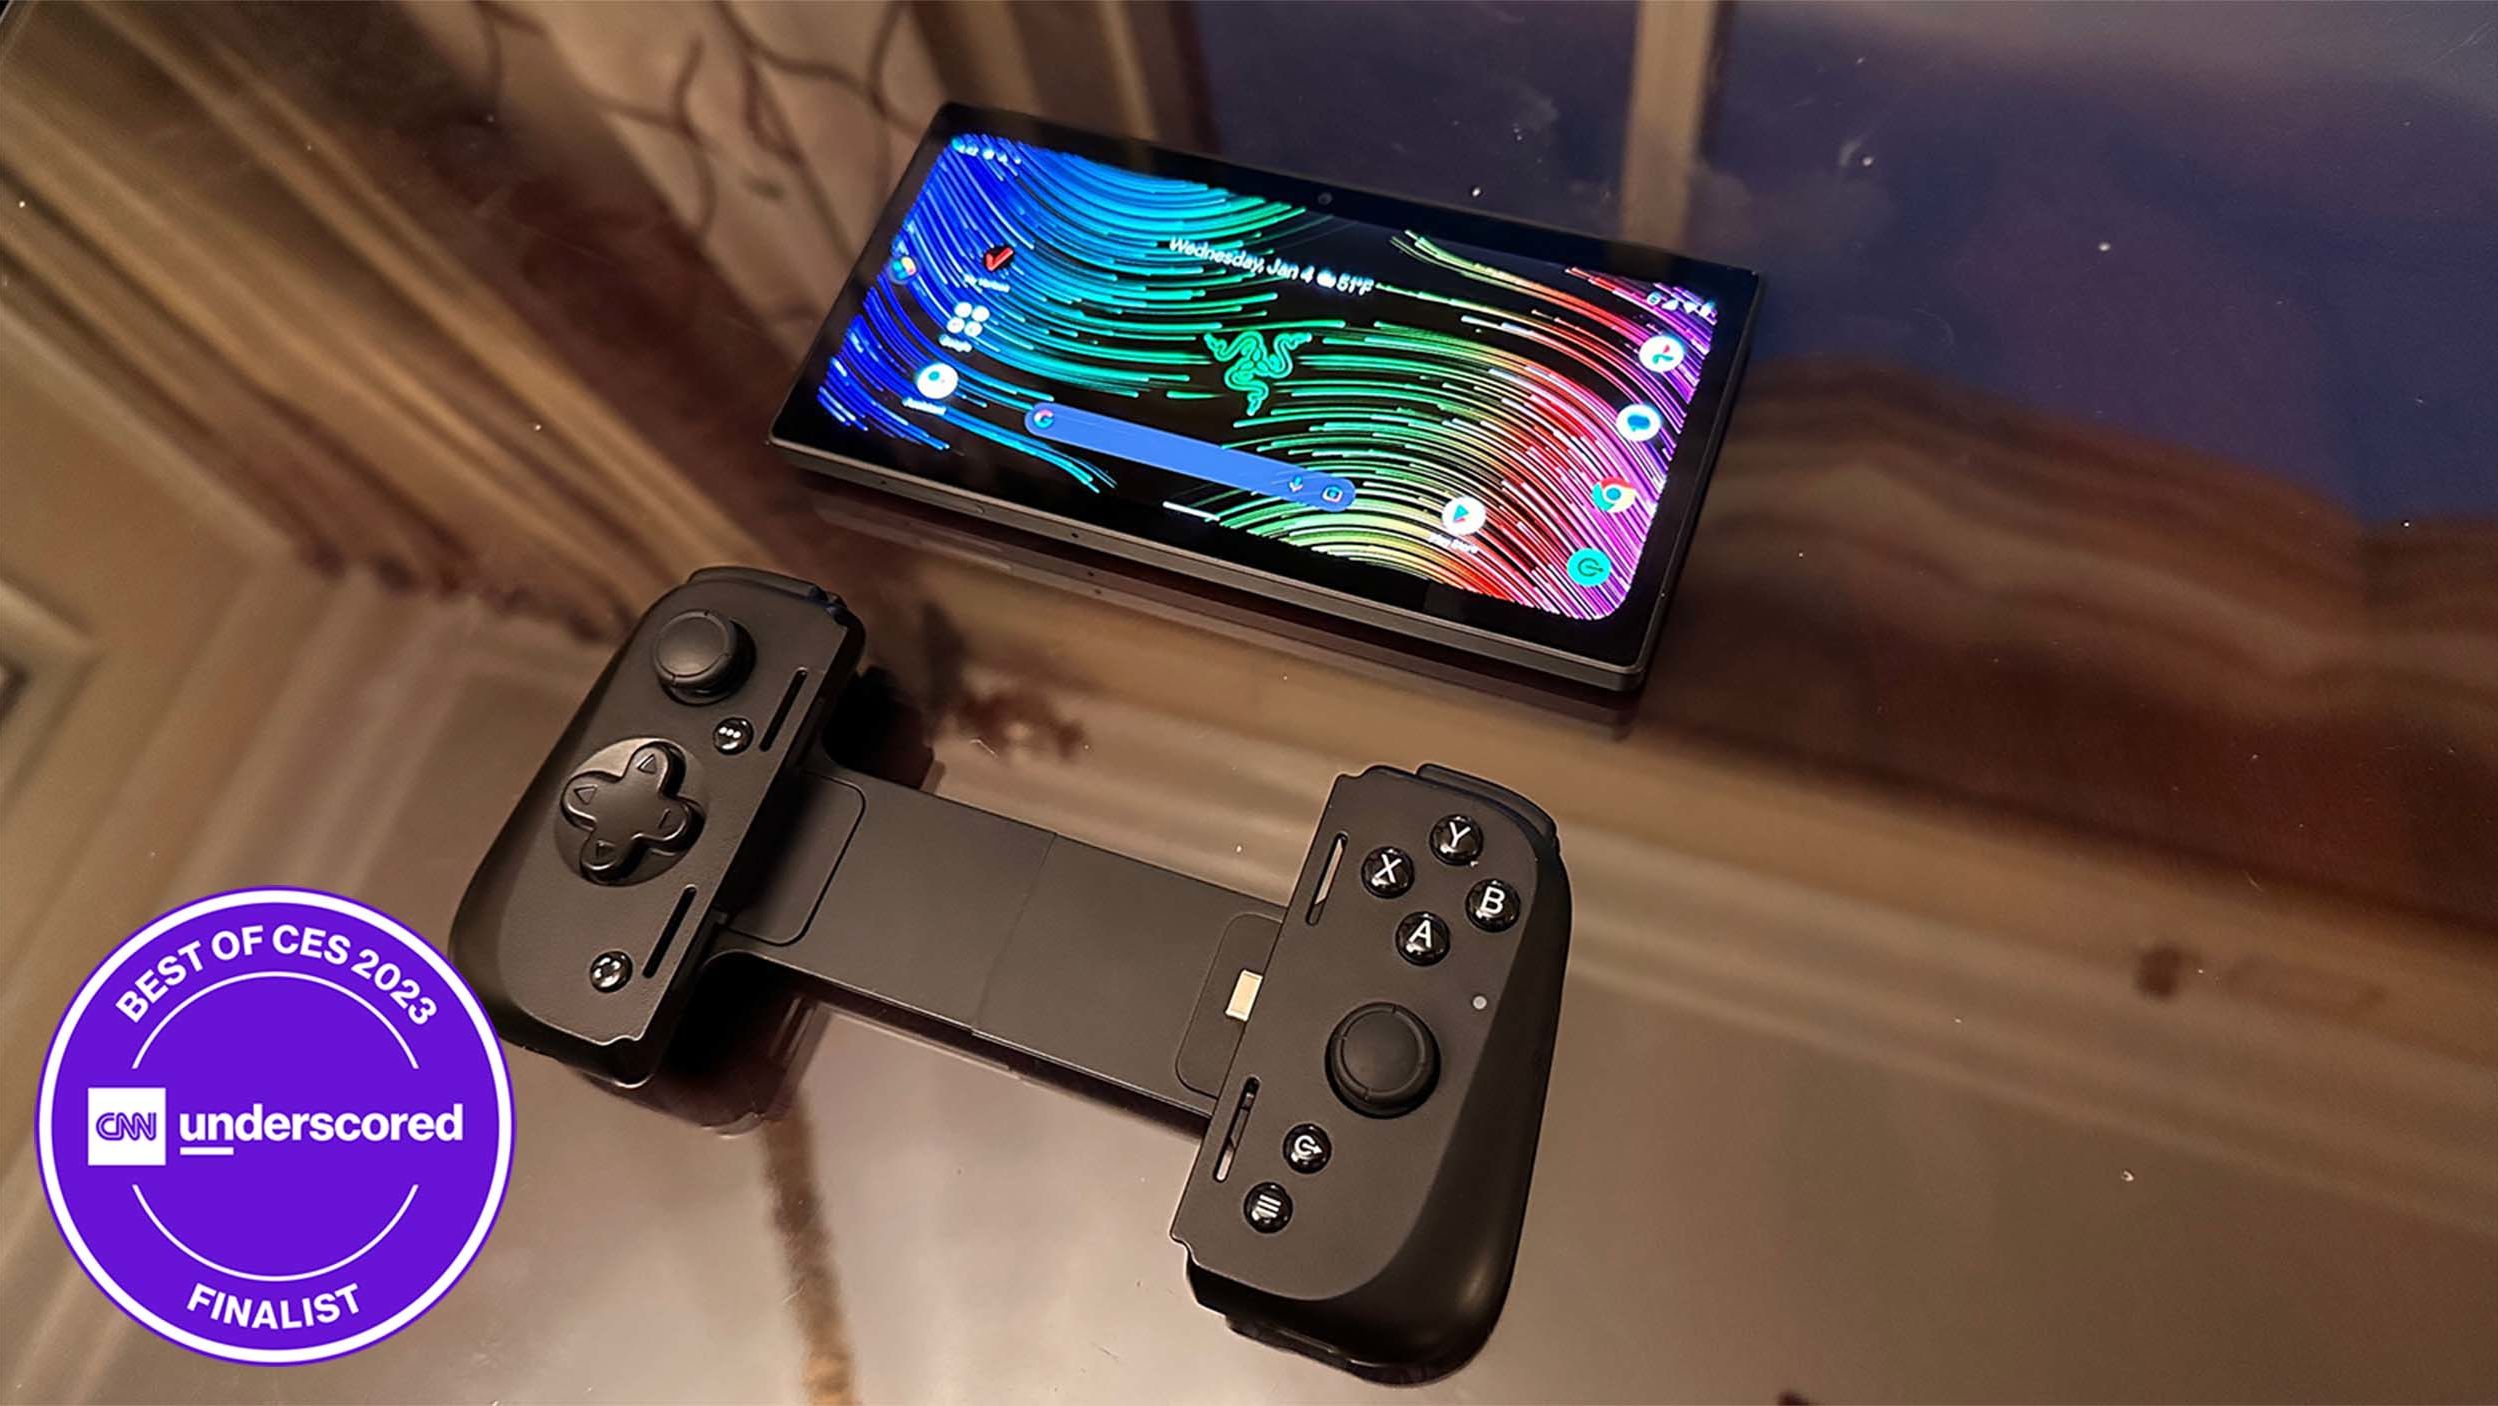 Razer's Kishi is the Switch-style phone controller I've been waiting for